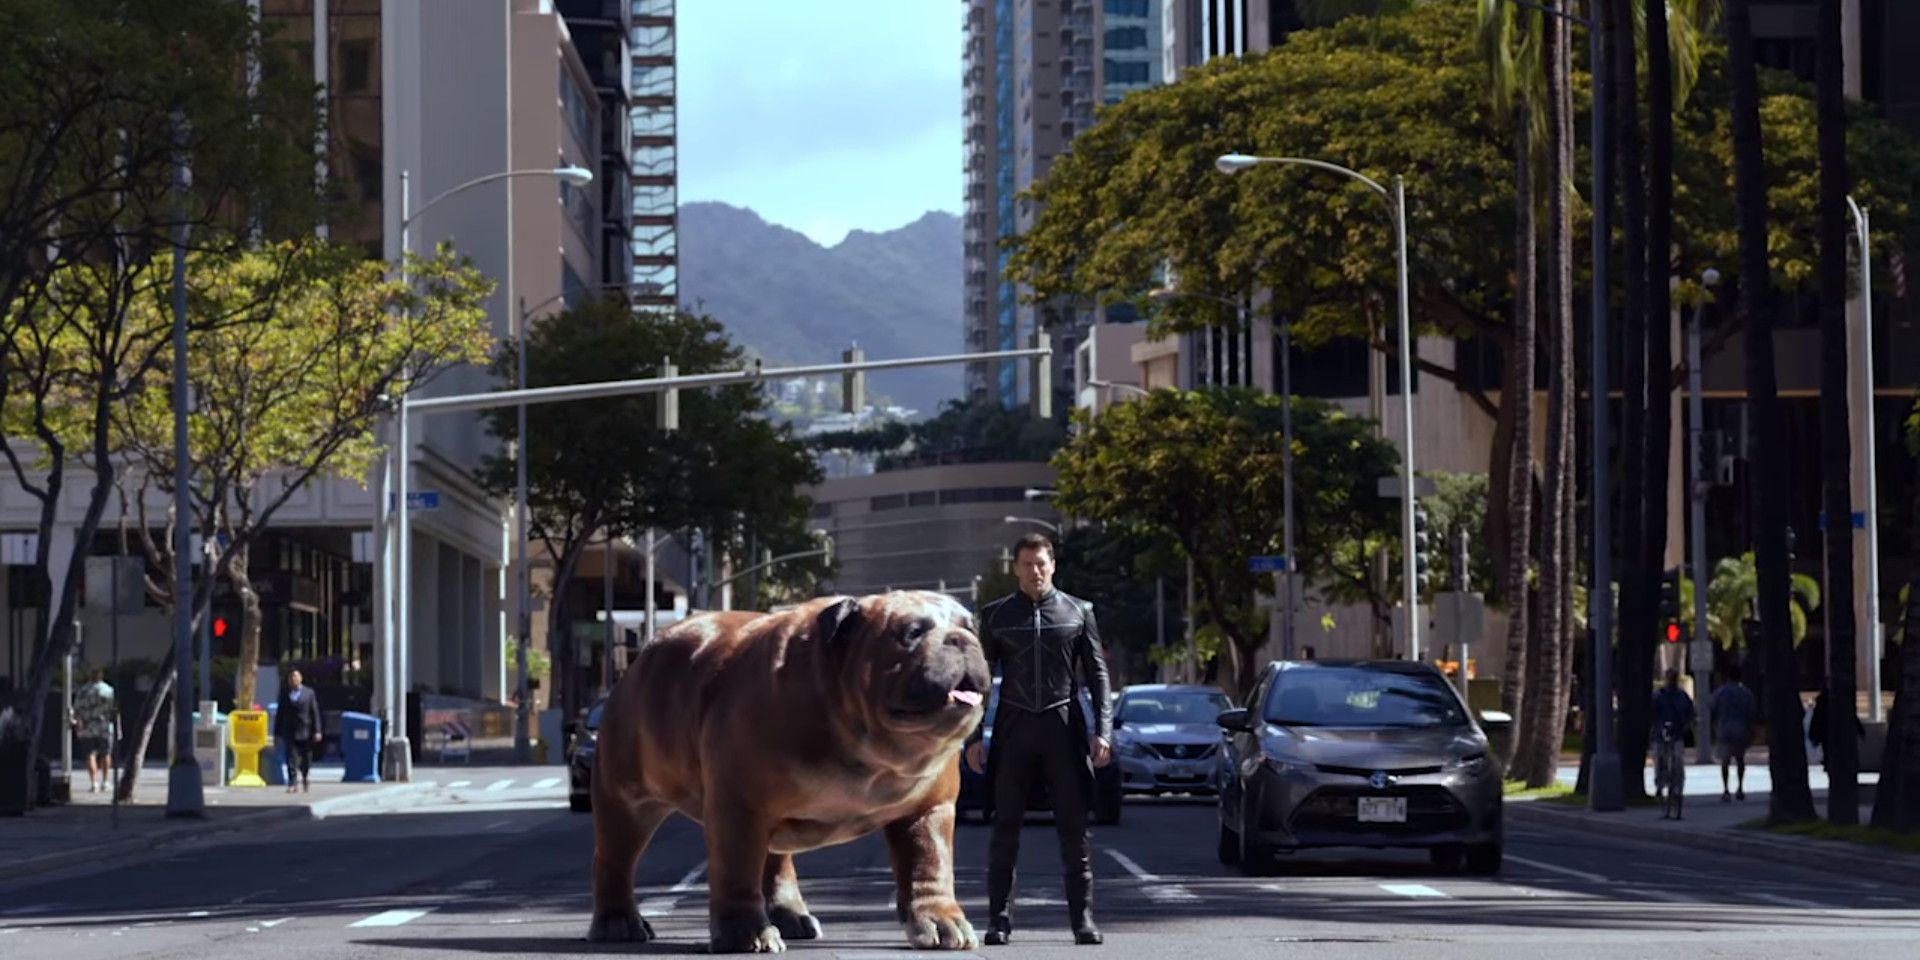 Lockjaw stands in the middle of the street after teleporting with Black Bolt in Inhumans